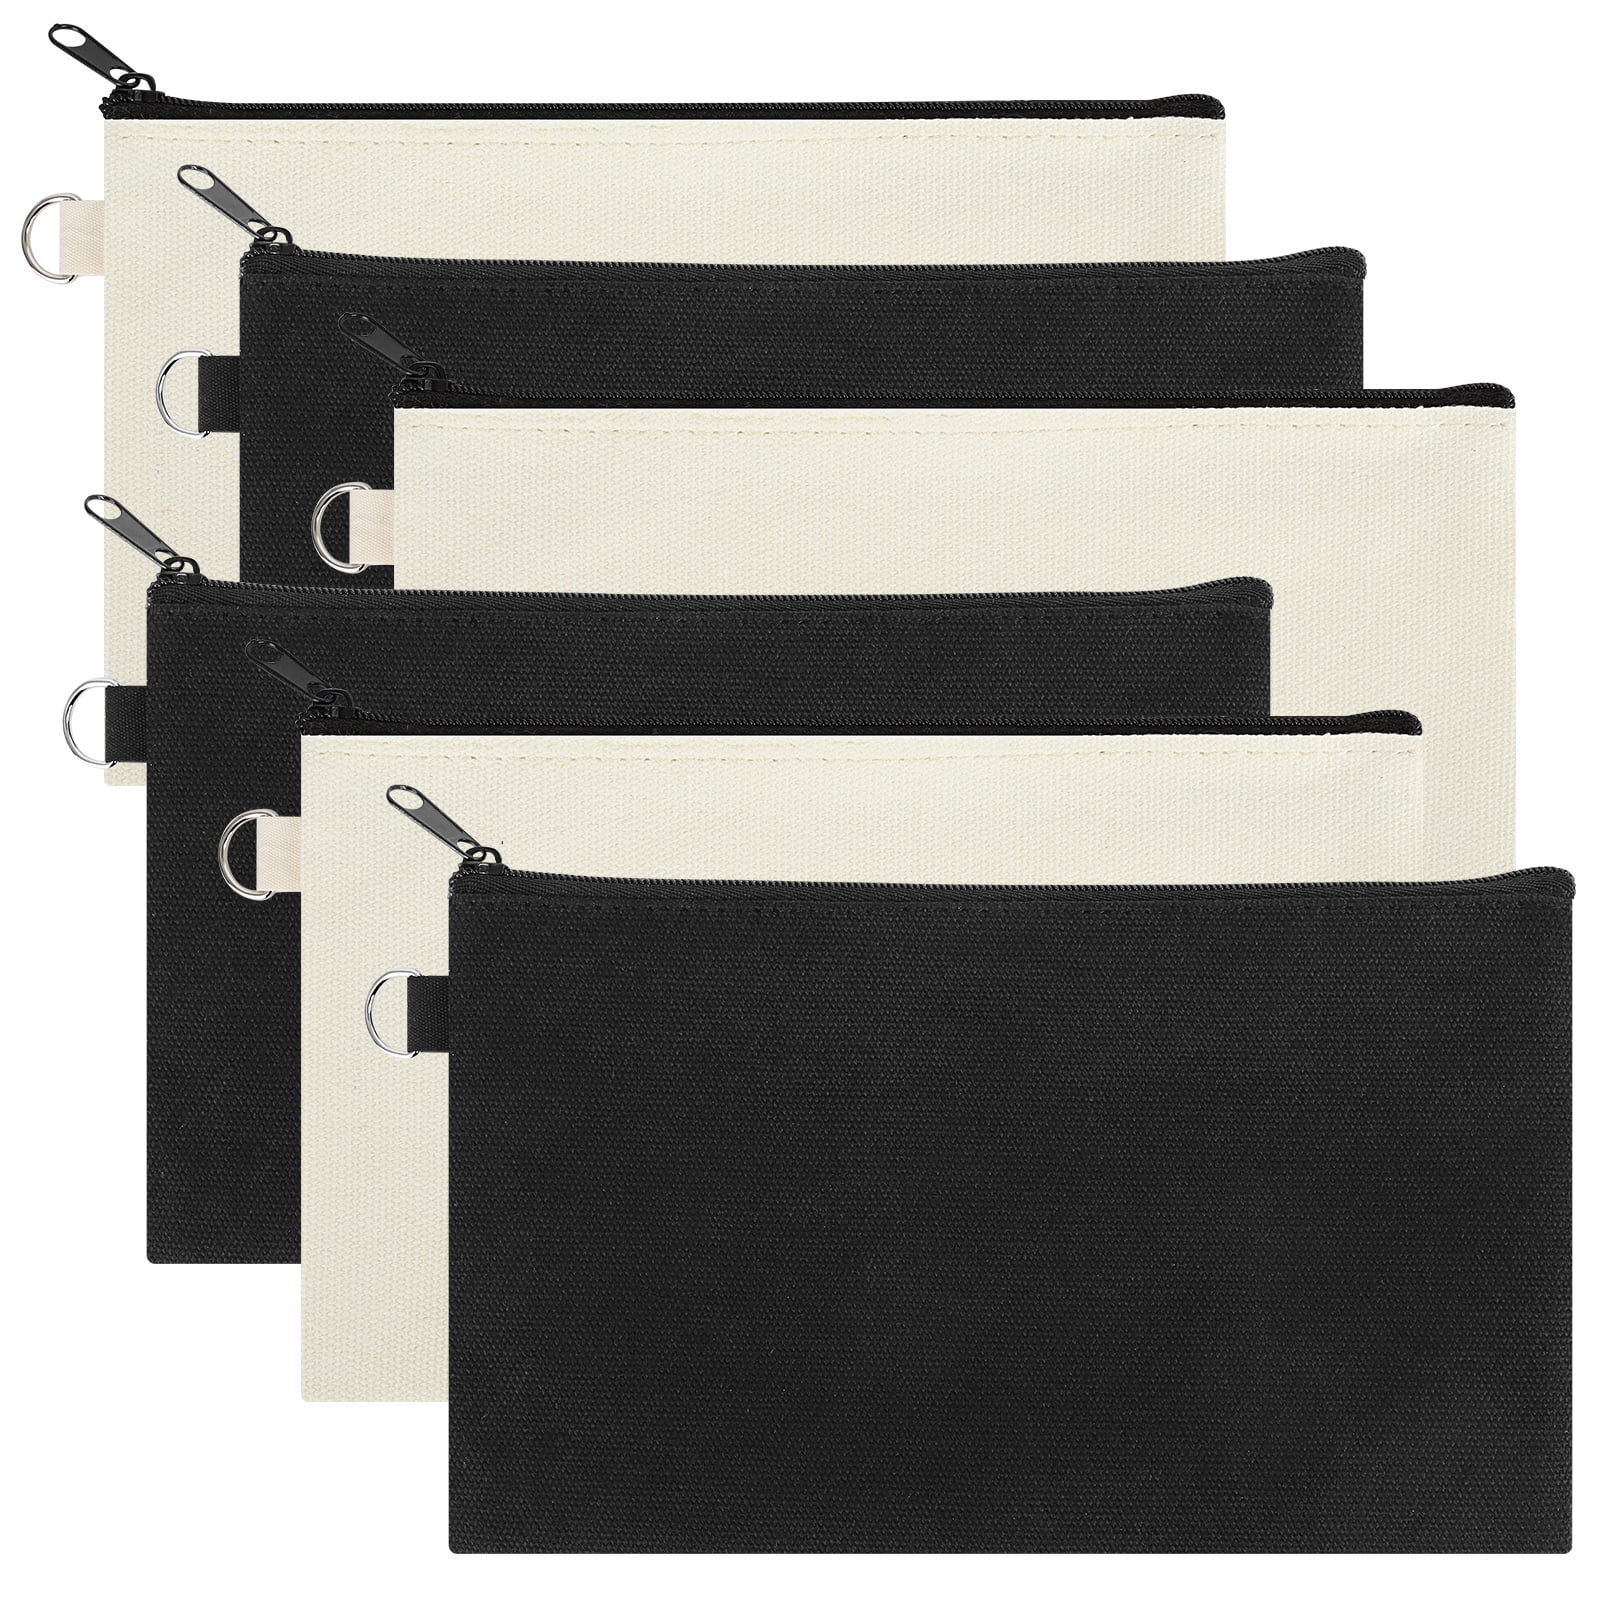 Aspire 6-Pack Large DIY Canvas Bags with Zipper, 11 3/4 x 9 1/2 Inch Letter  Size / A4 Document Bag